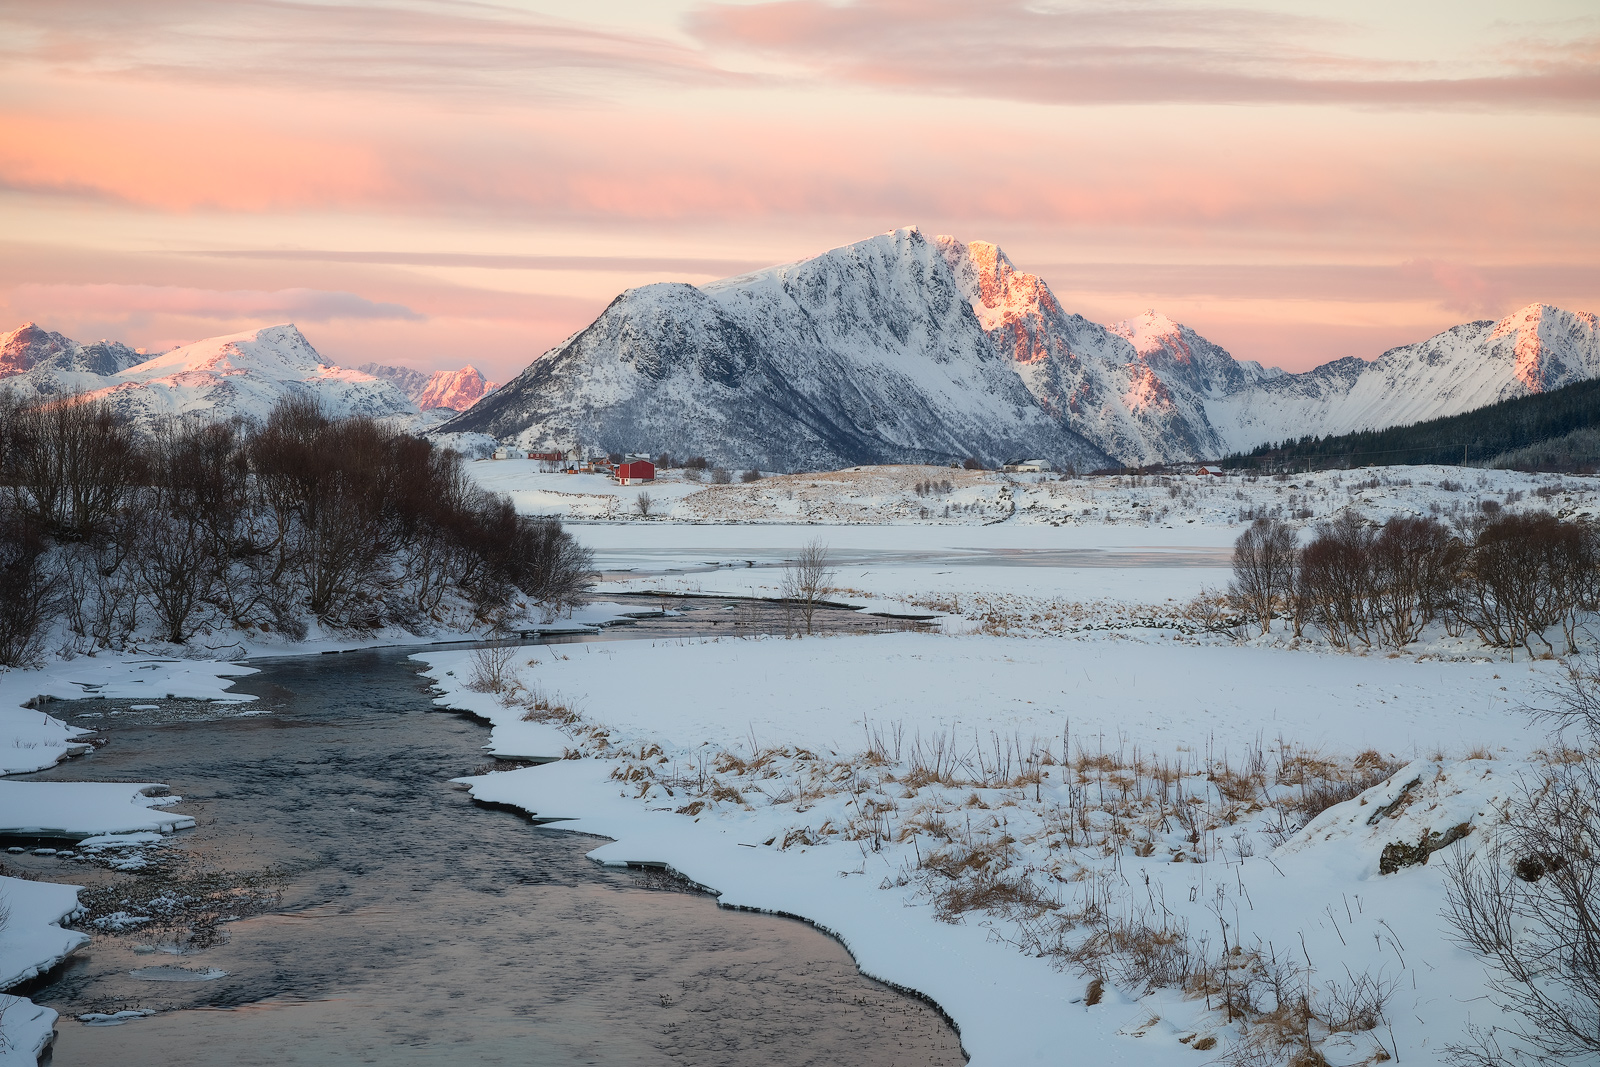 A quintessential Winter scene lights up at sunrise in Lofoten, Norway.